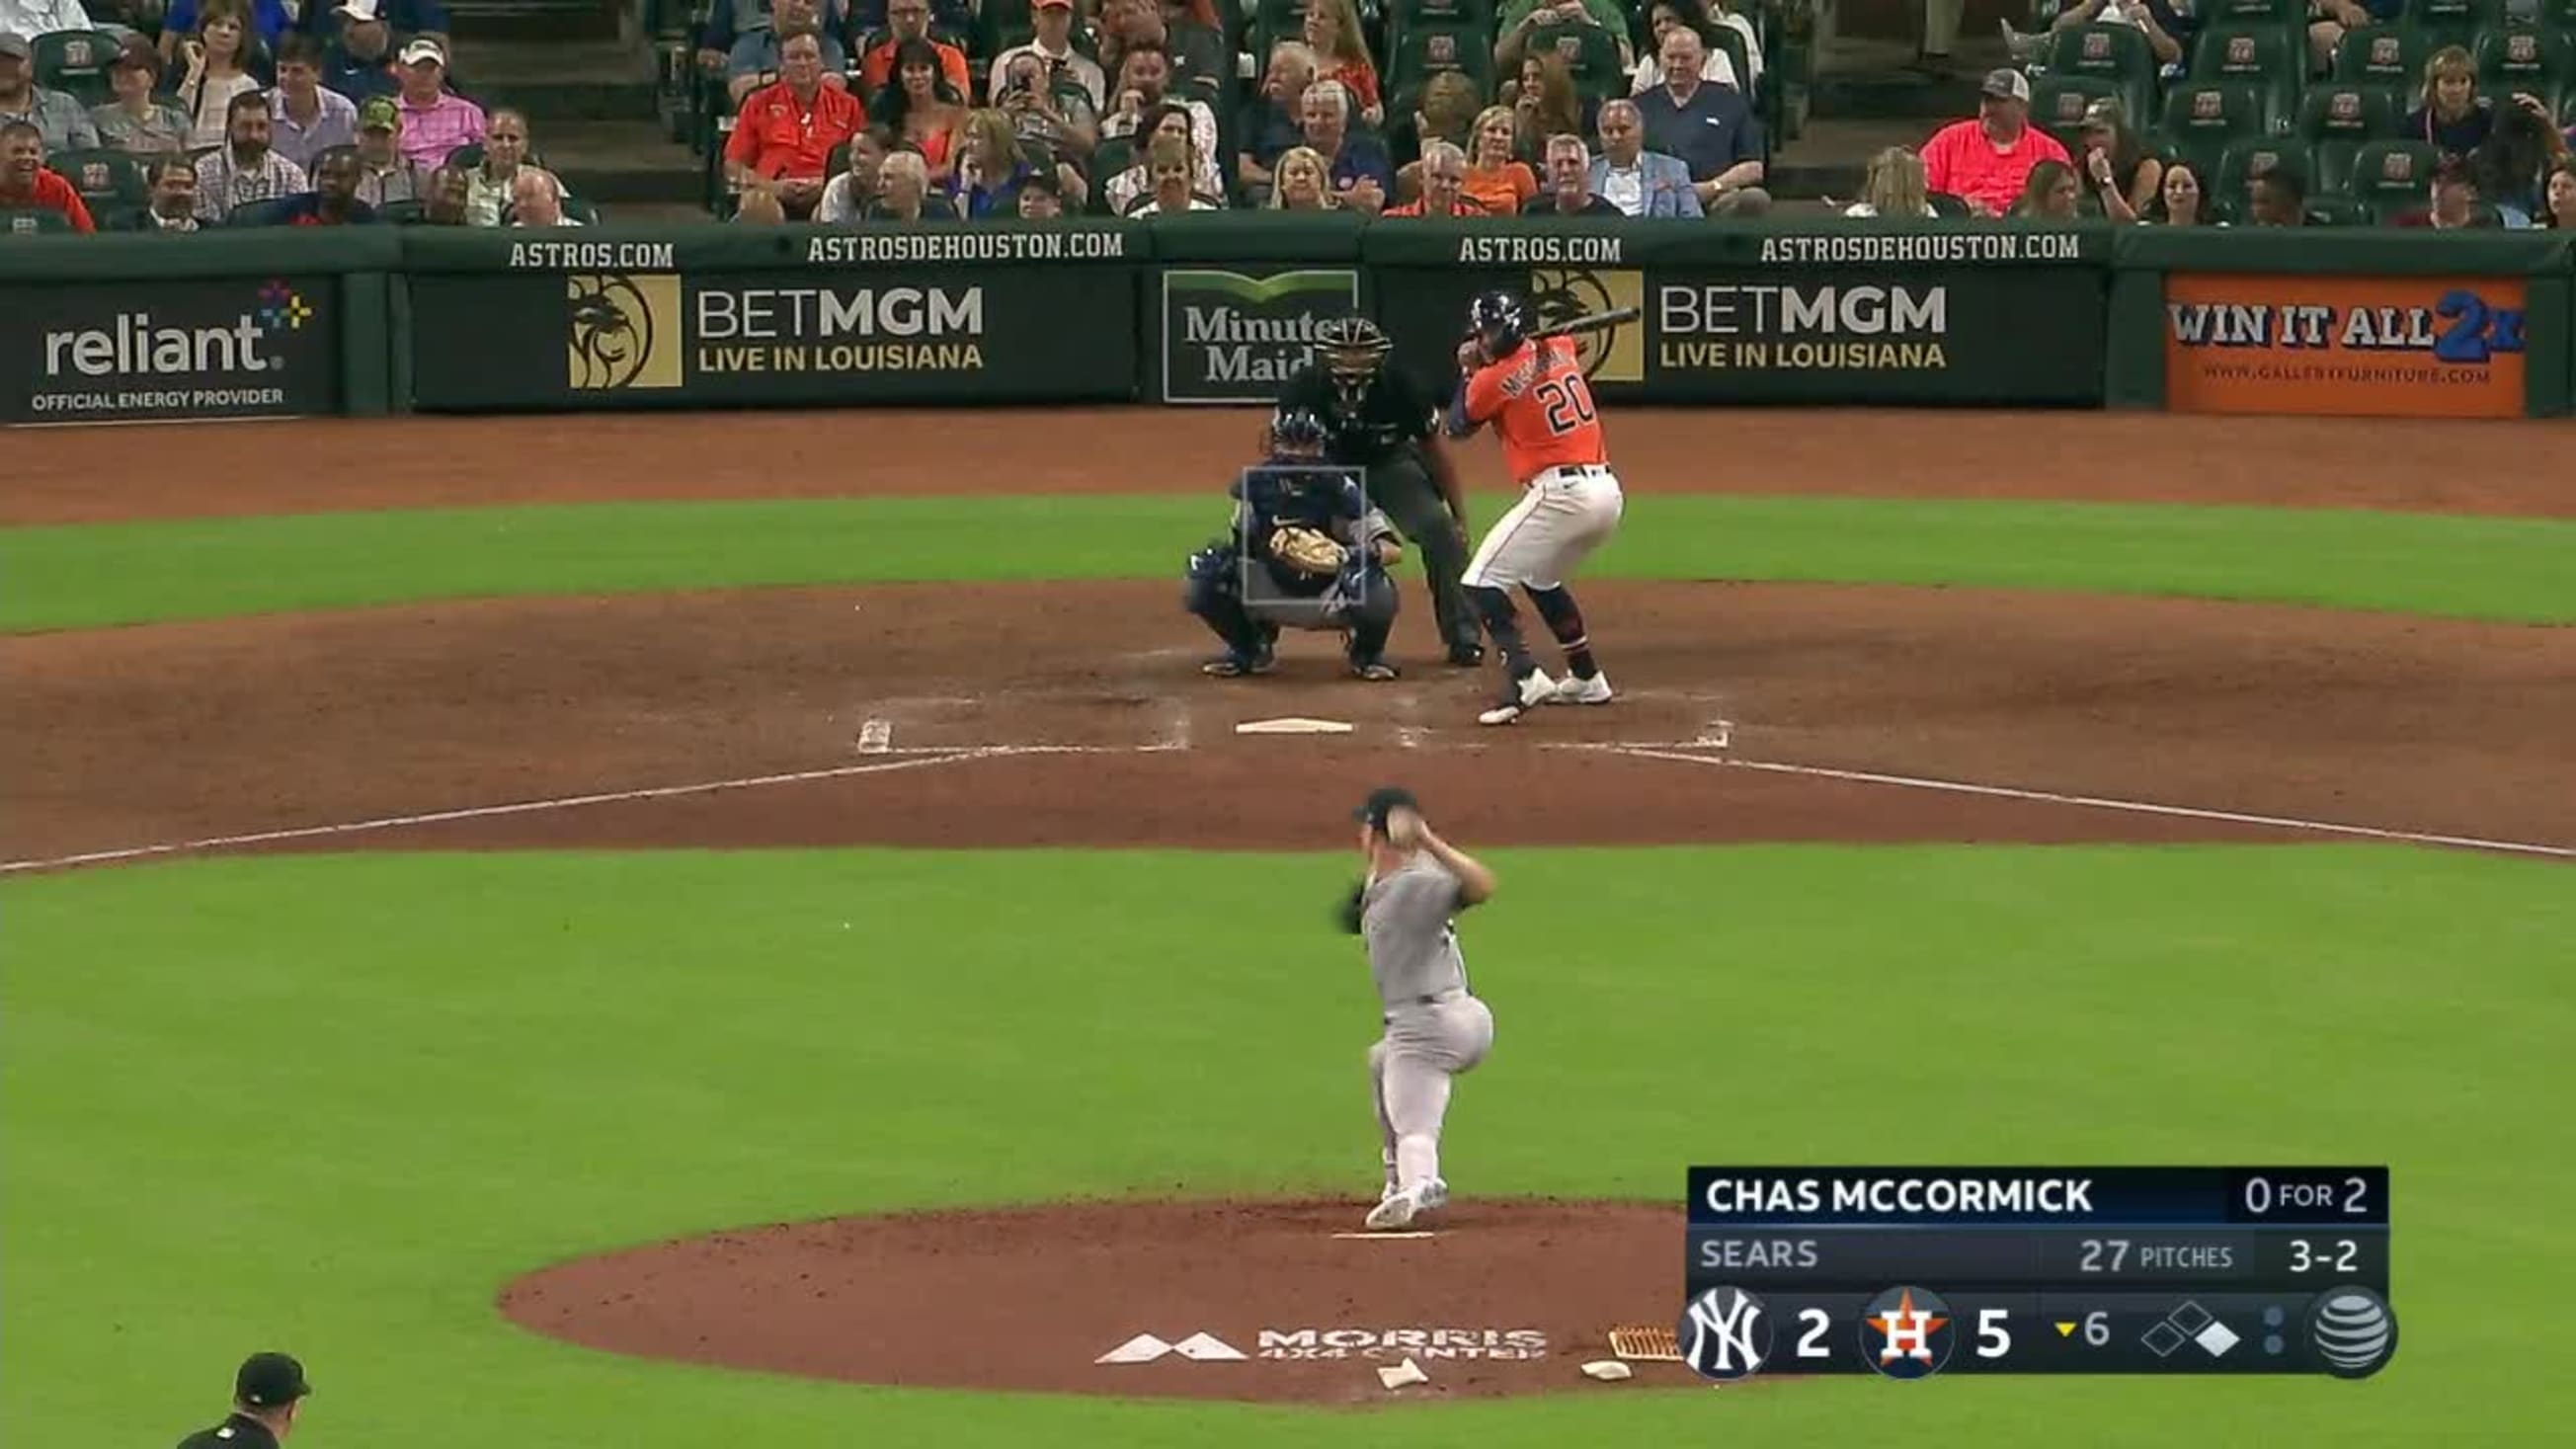 FOX Sports: MLB on X: Still in awe of the catch by Chas McCormick ⭐️  (via @astros/@TracesofTexas)  / X